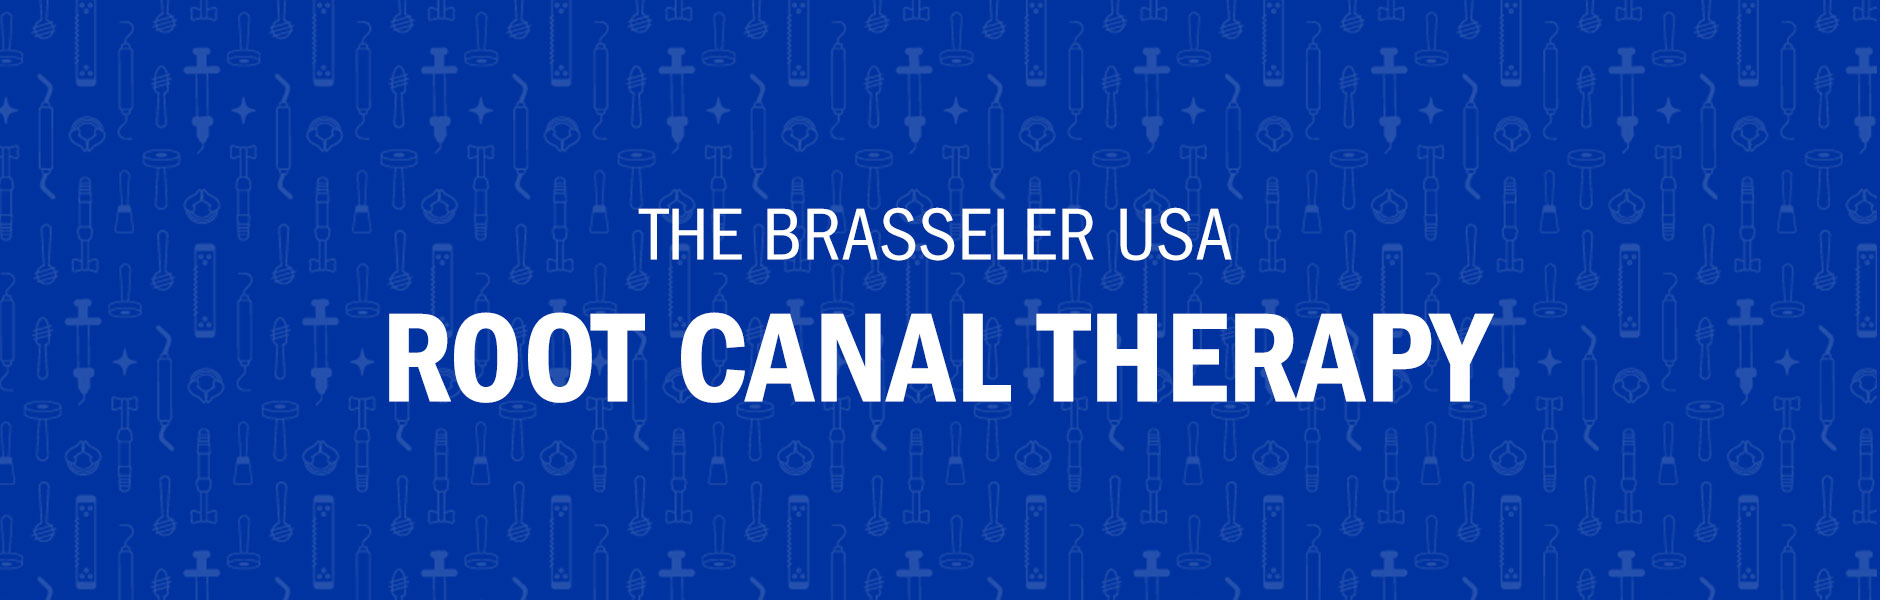 The Brasseler USA Root Canal Therapy